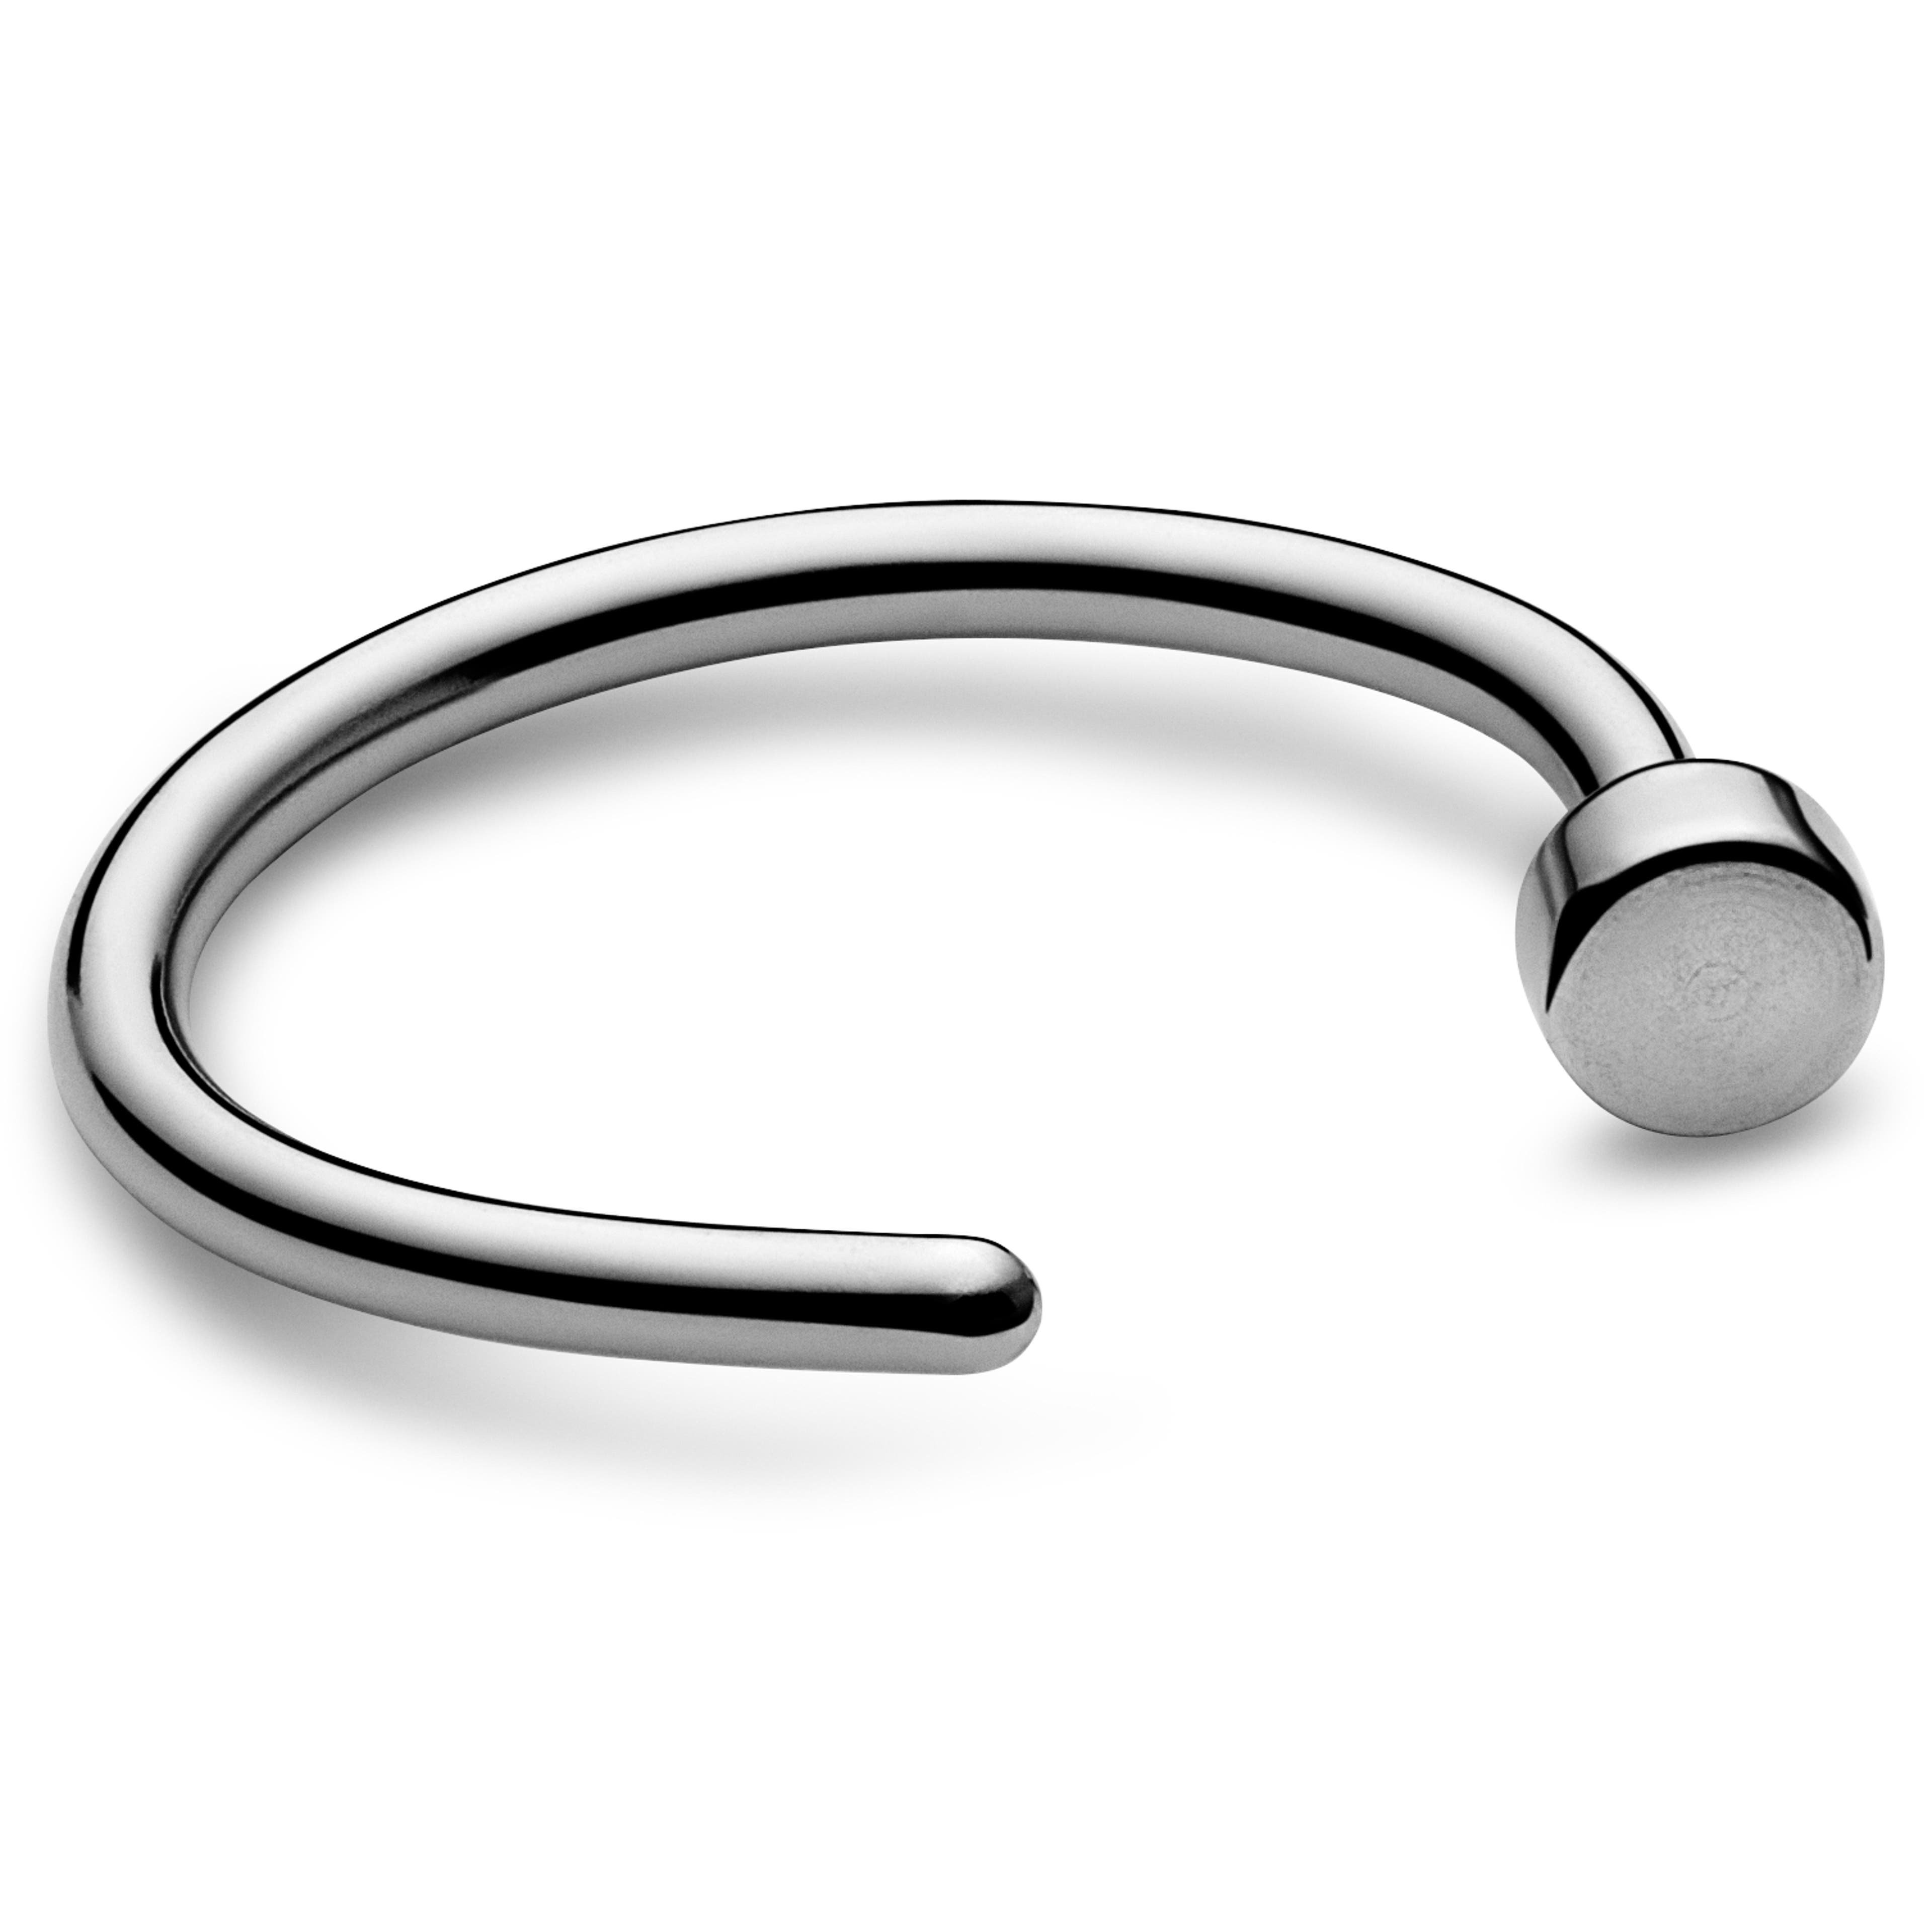 8 mm Open Silver-Tone Surgical Steel Nose Ring